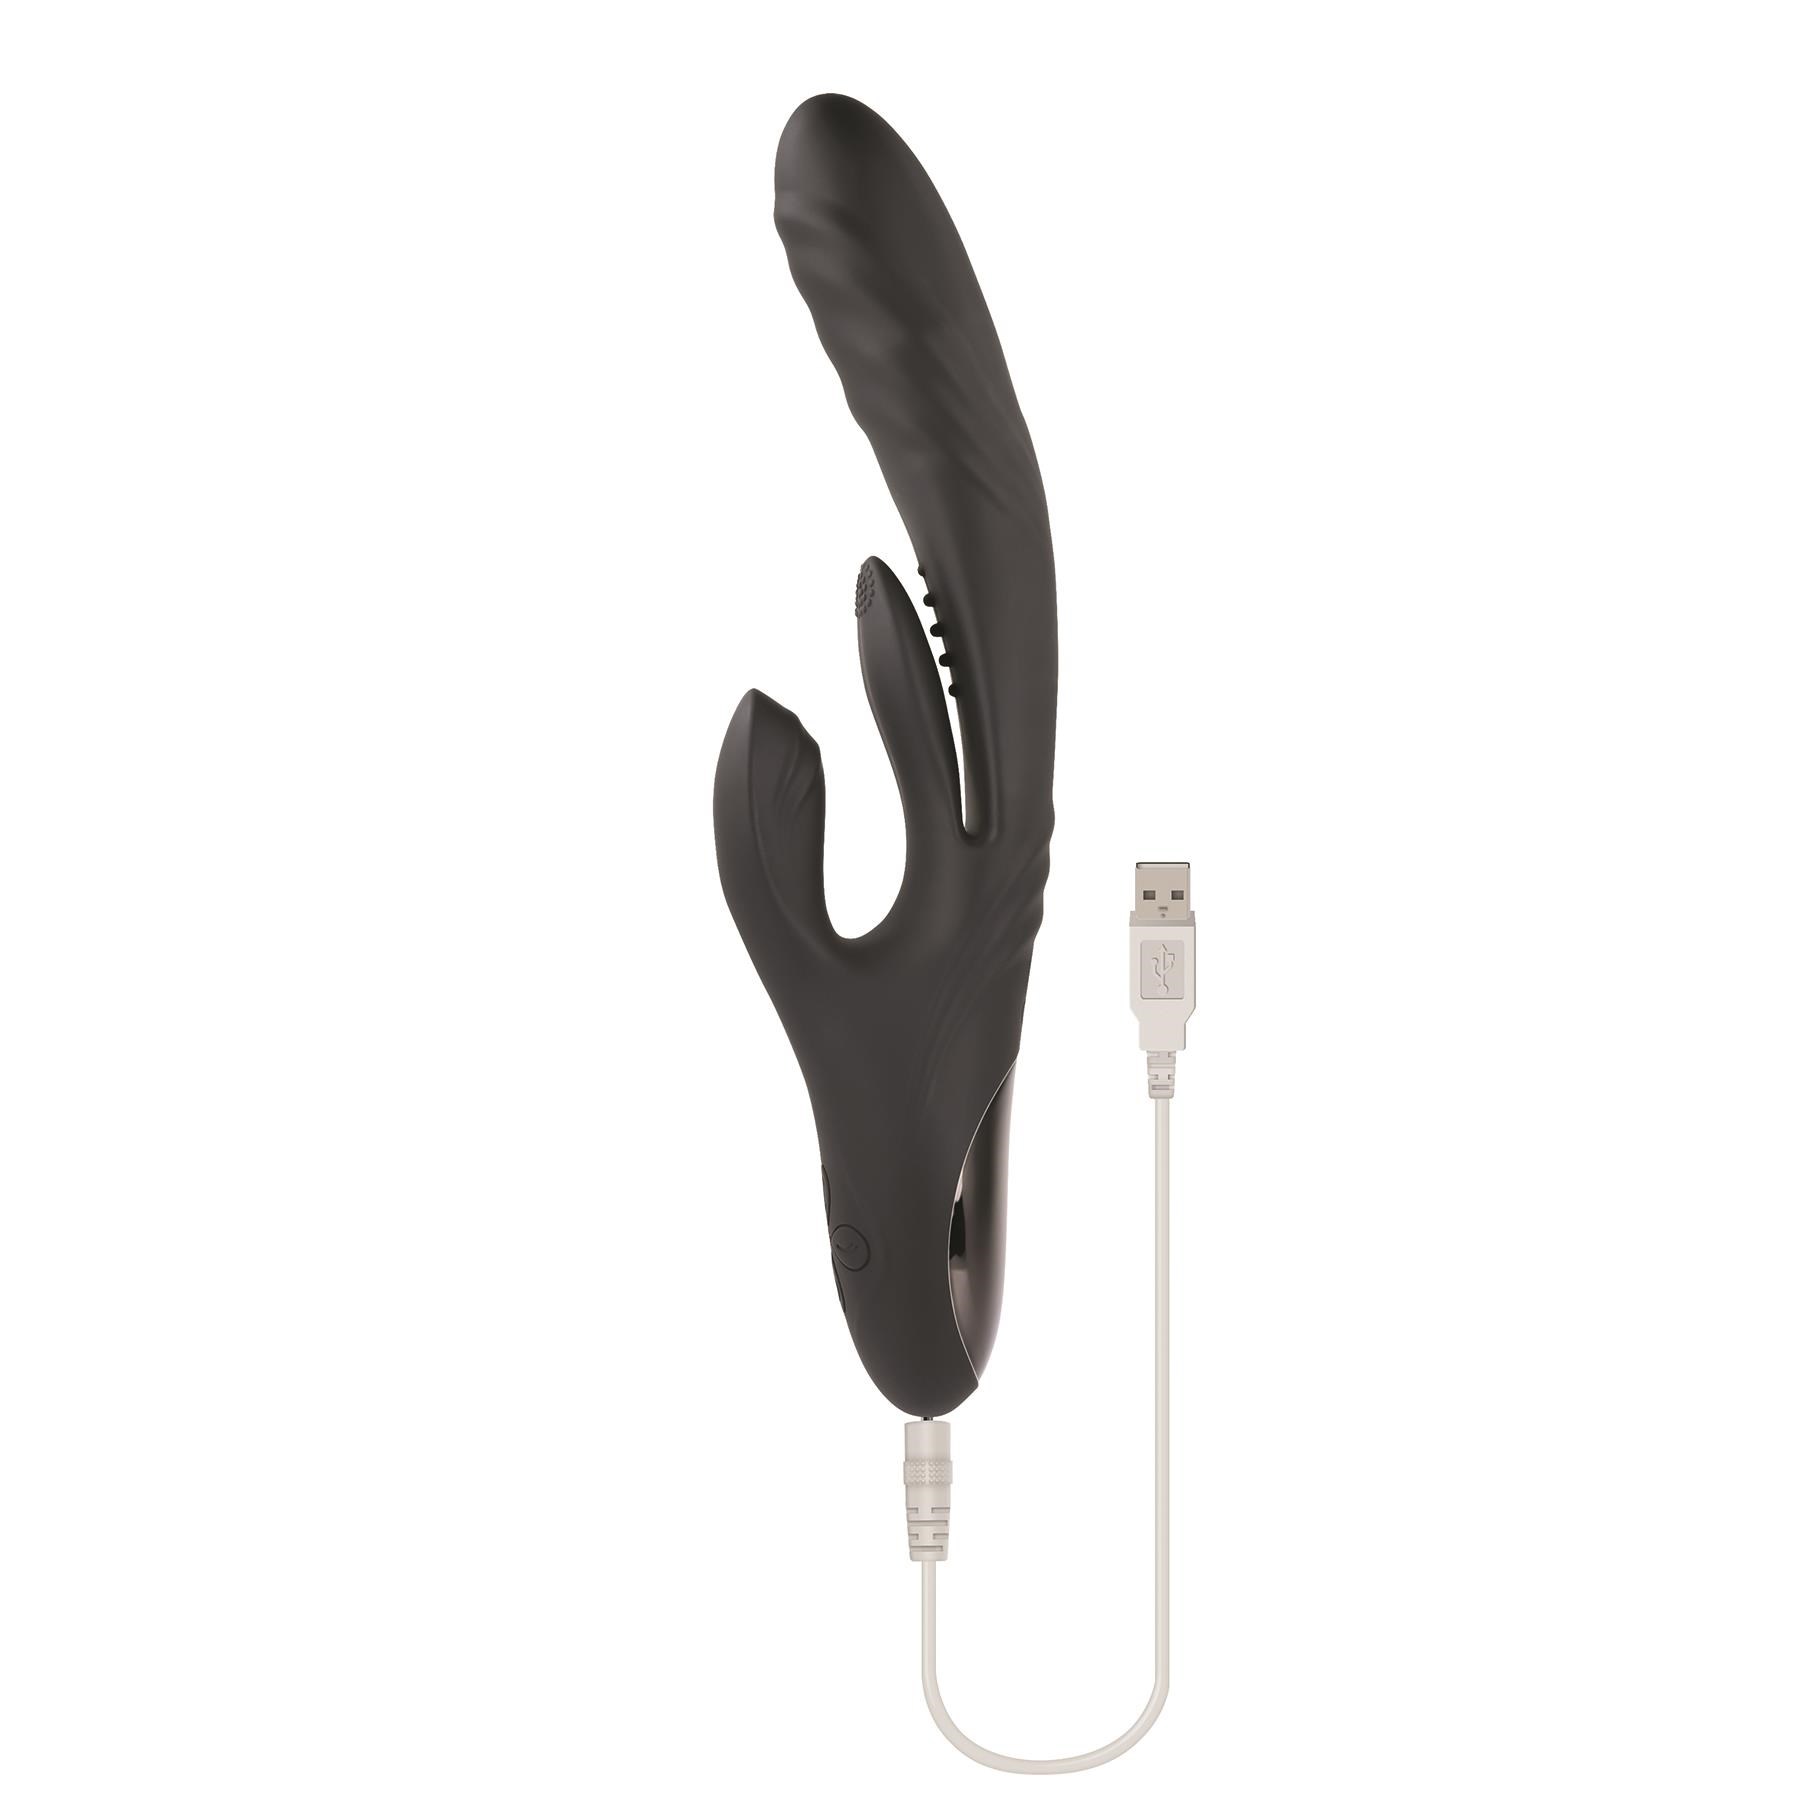 Playboy Pleasure Rapid Rabbit Triple Stimulating Massager Showing Where Charging Cable is Placed